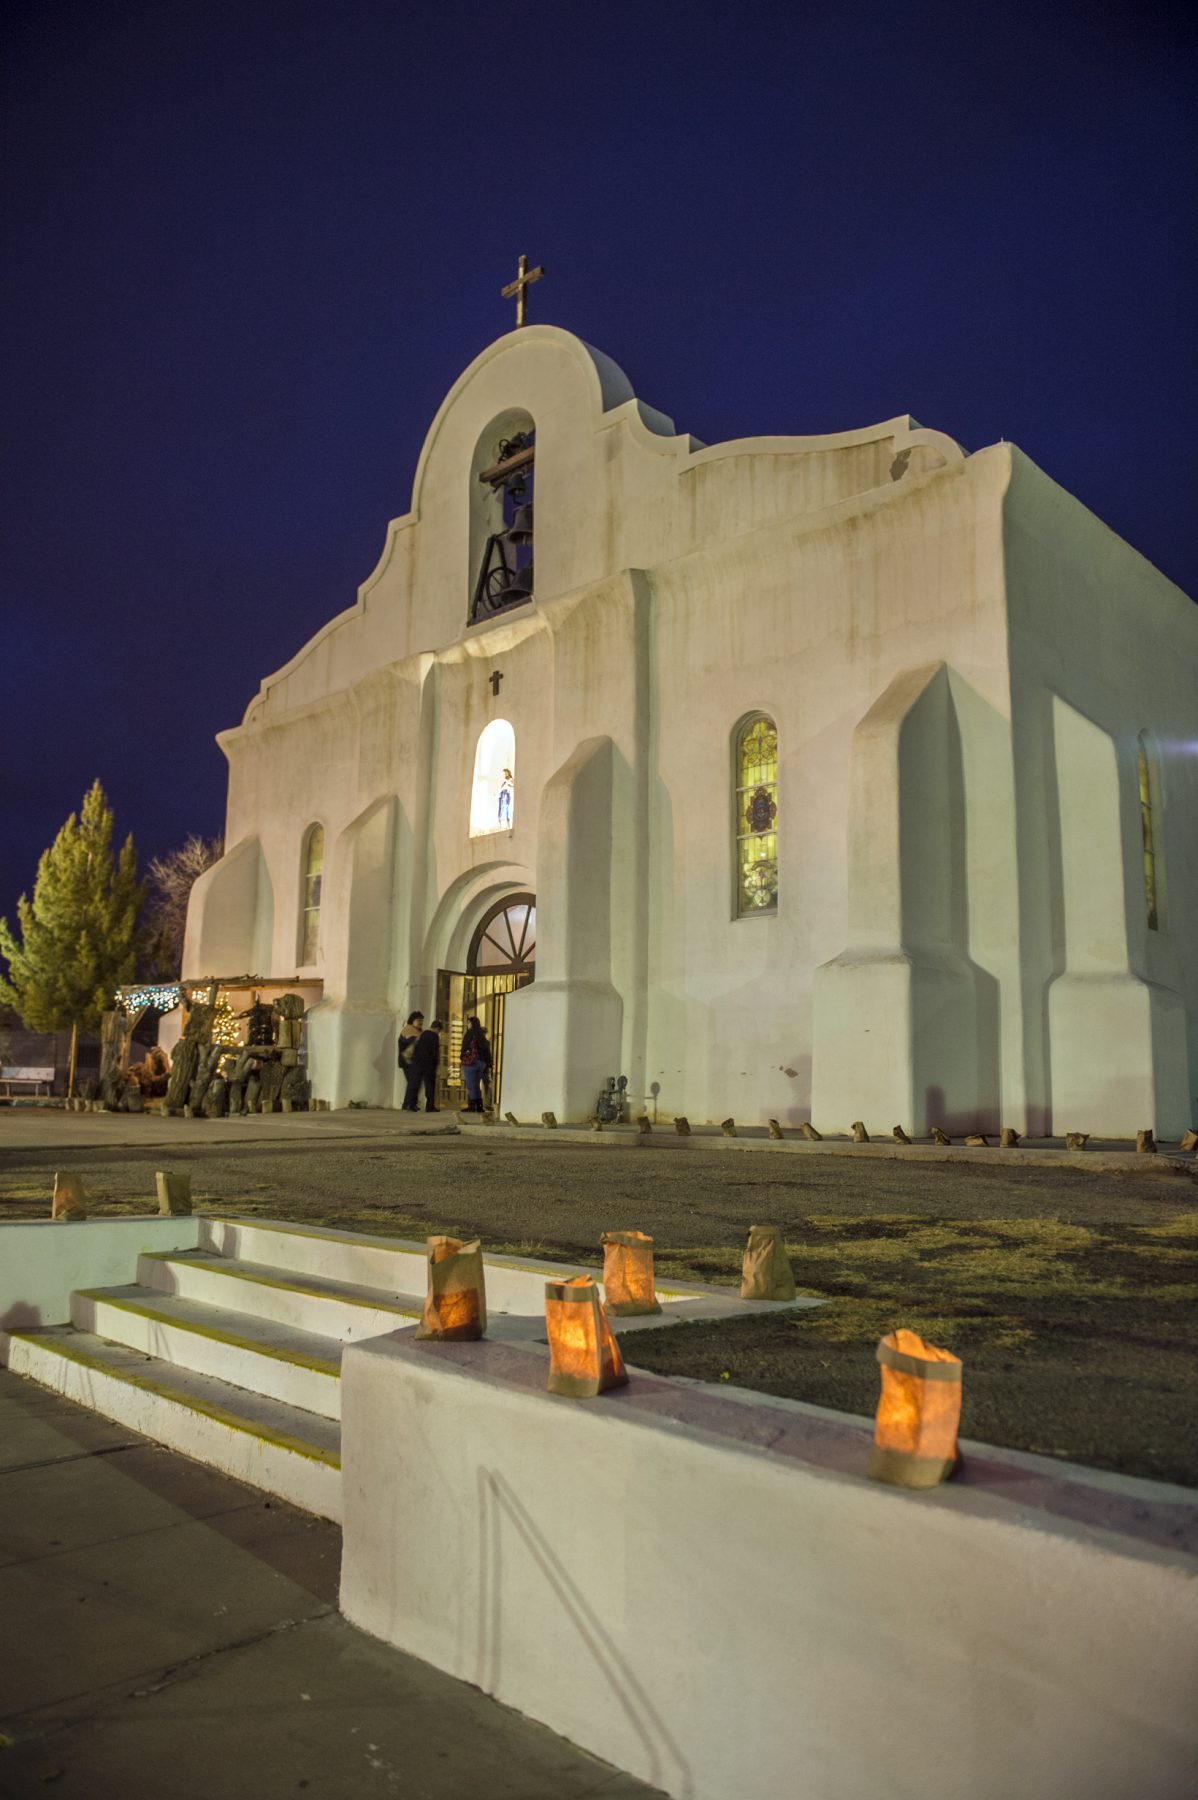 The El Paso Missions like at San Elizario Presidio Chapel are lit up for Christmas events. Photo by Kevin Stillman.